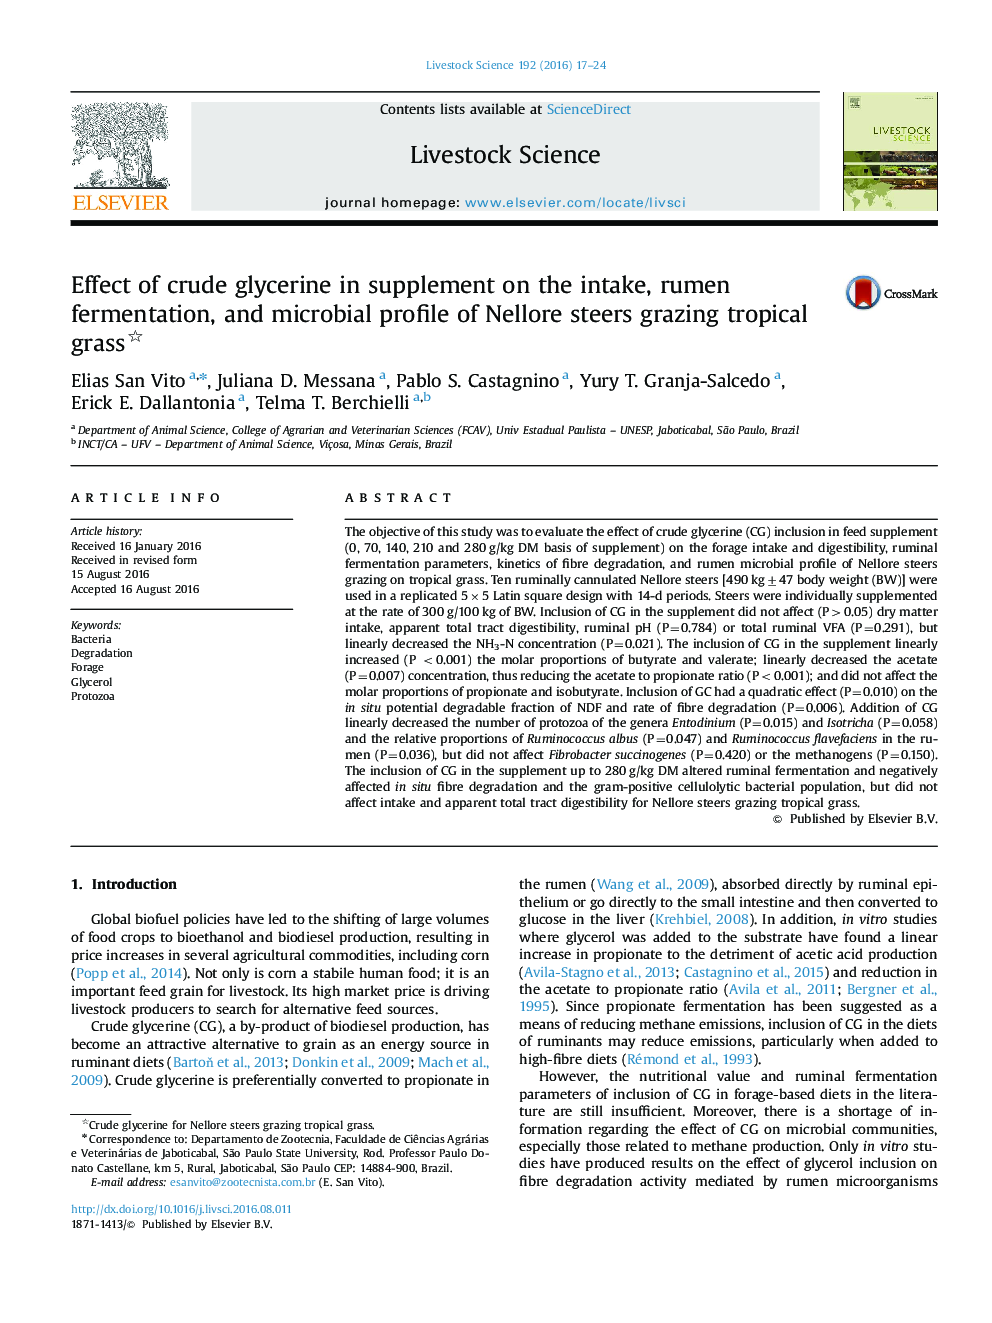 Effect of crude glycerine in supplement on the intake, rumen fermentation, and microbial profile of Nellore steers grazing tropical grass 